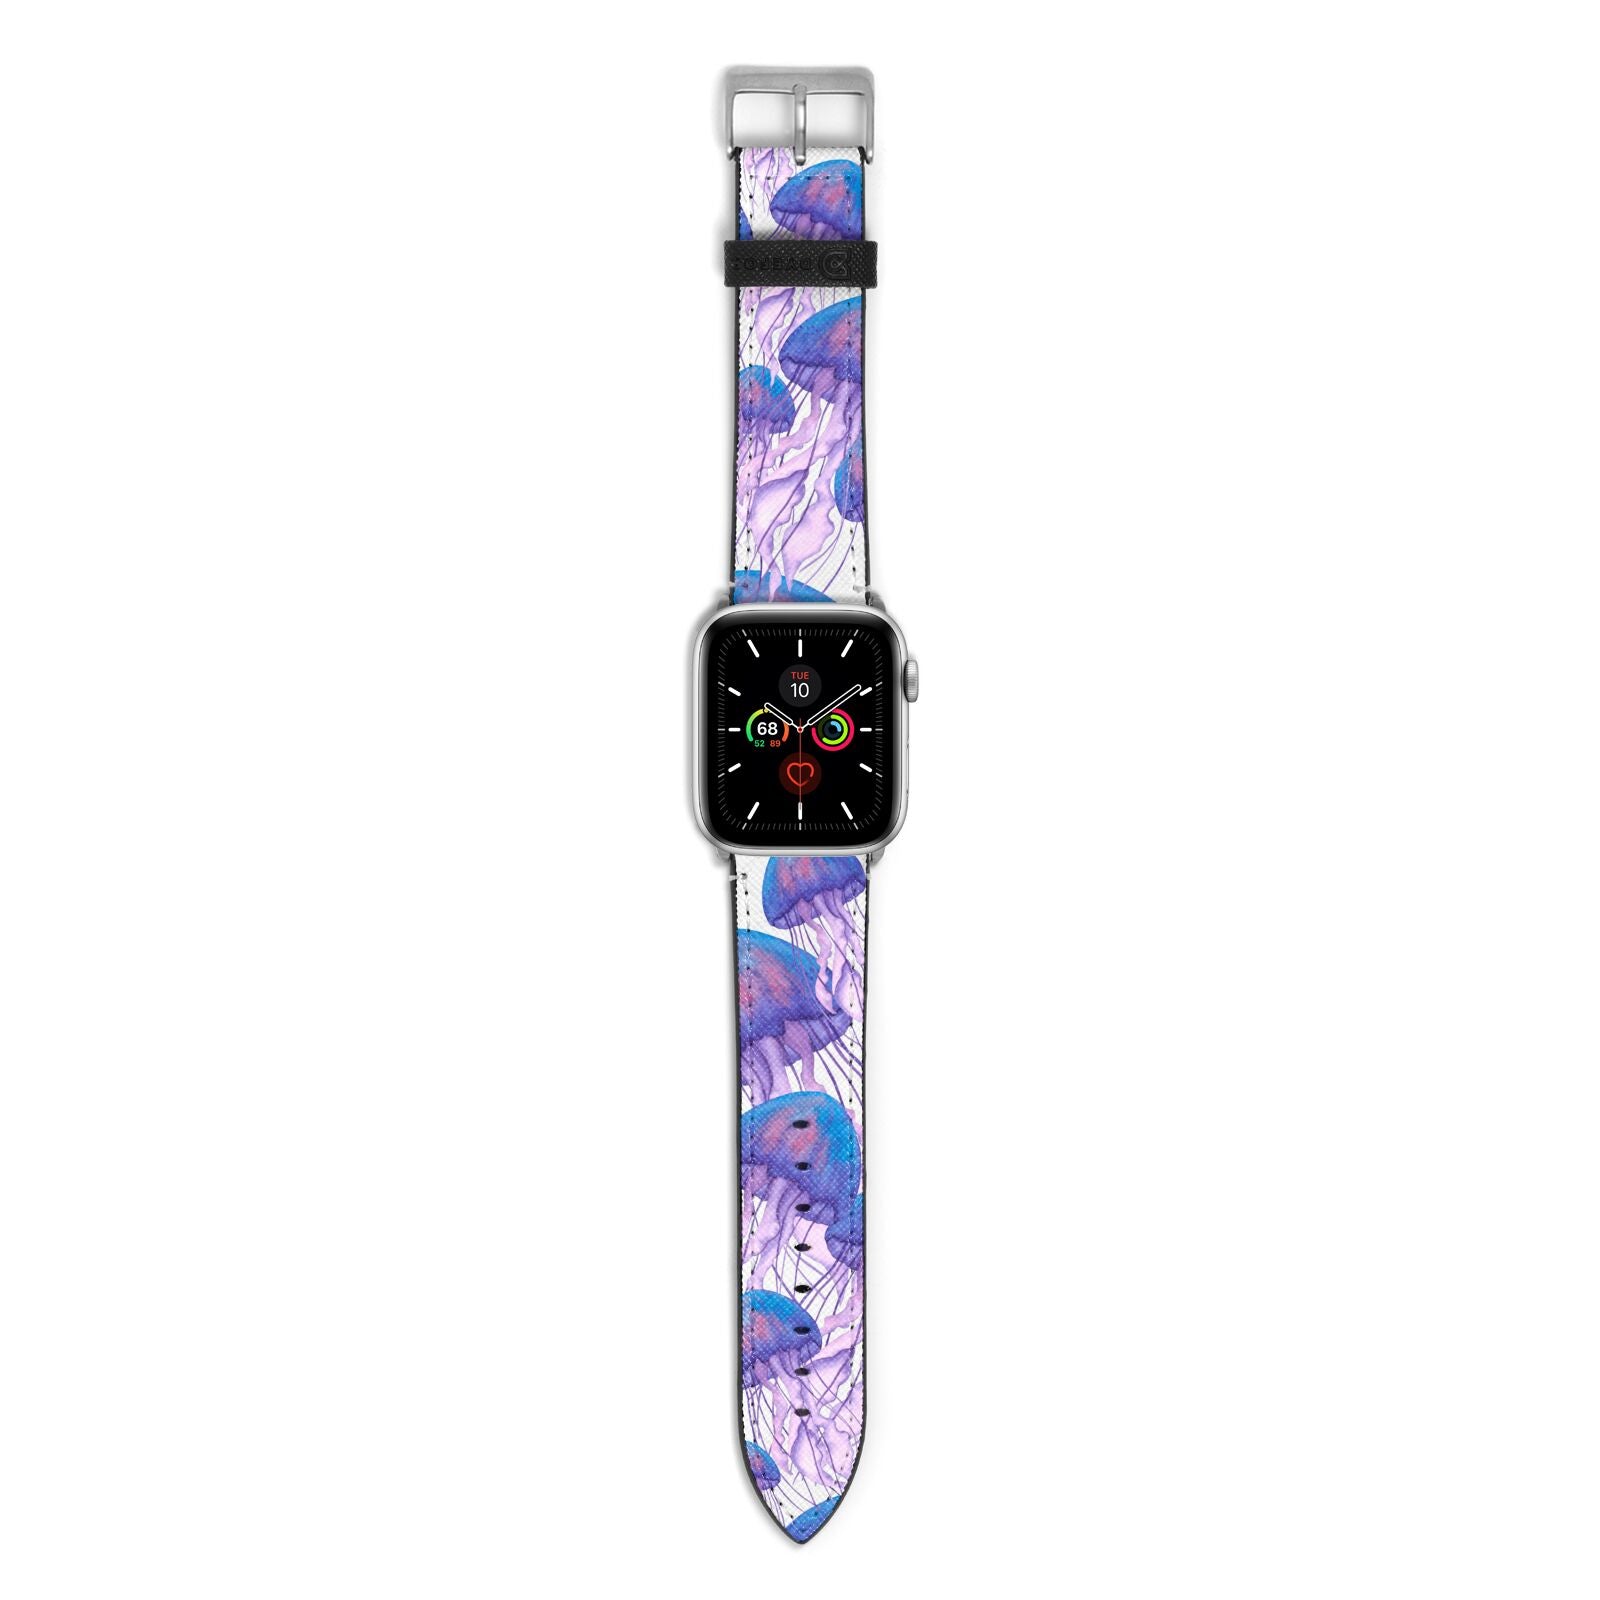 Jellyfish Apple Watch Strap with Silver Hardware